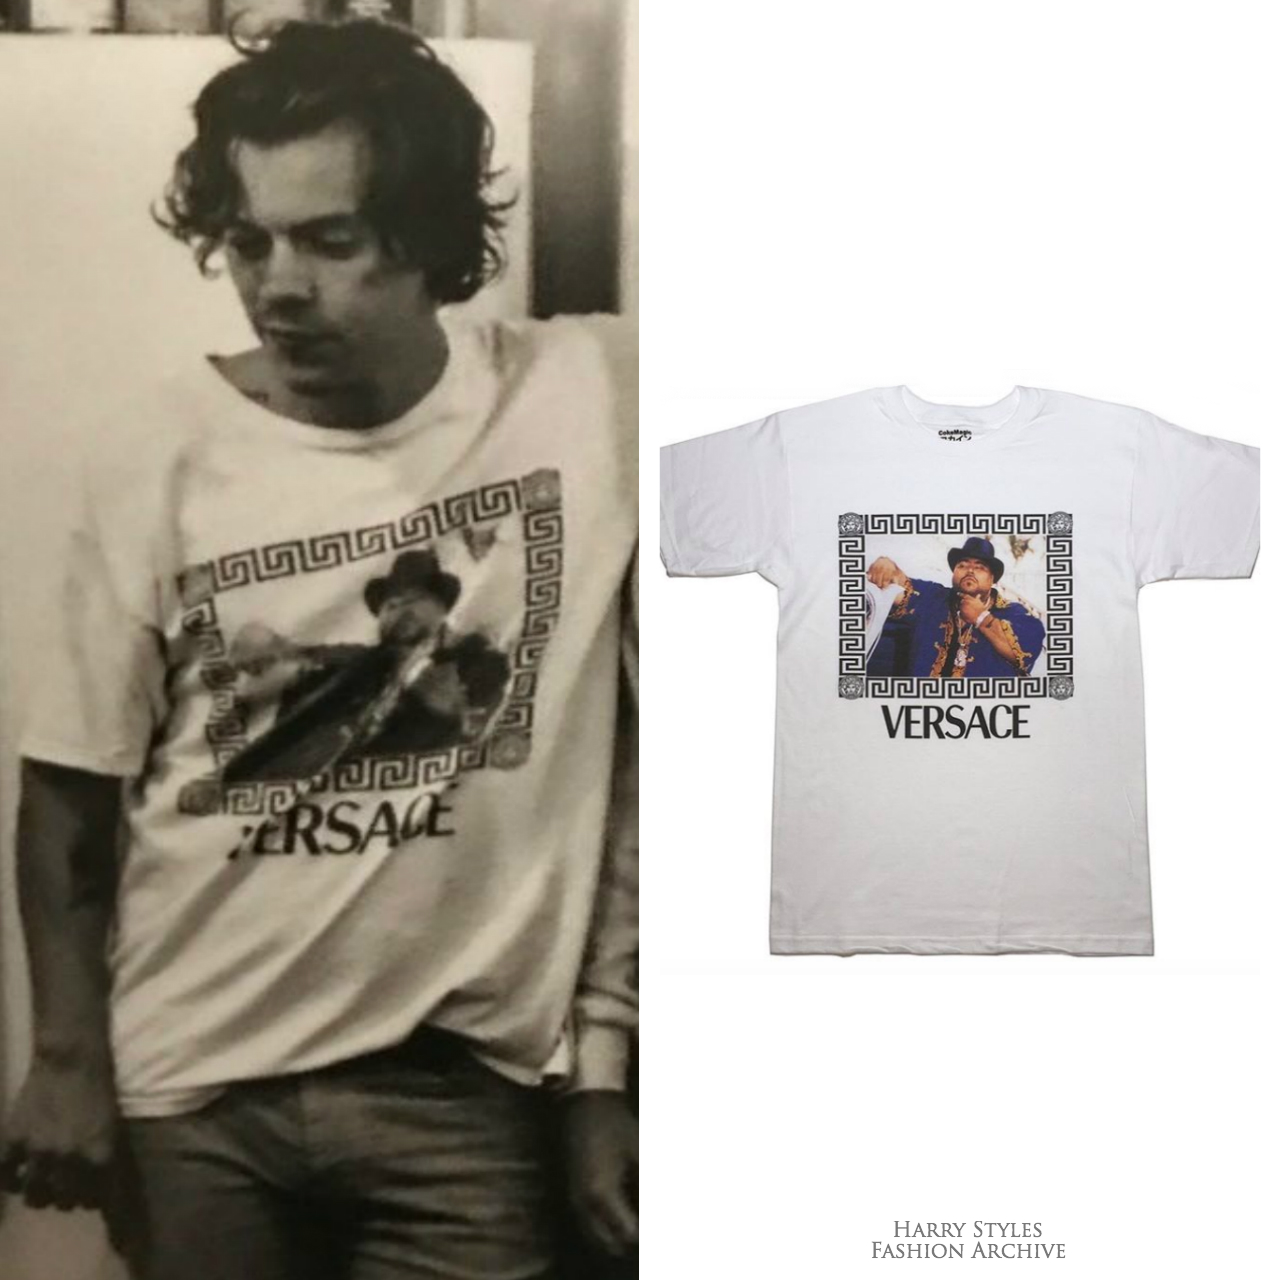 Harry Styles Fashion Archive on Twitter 